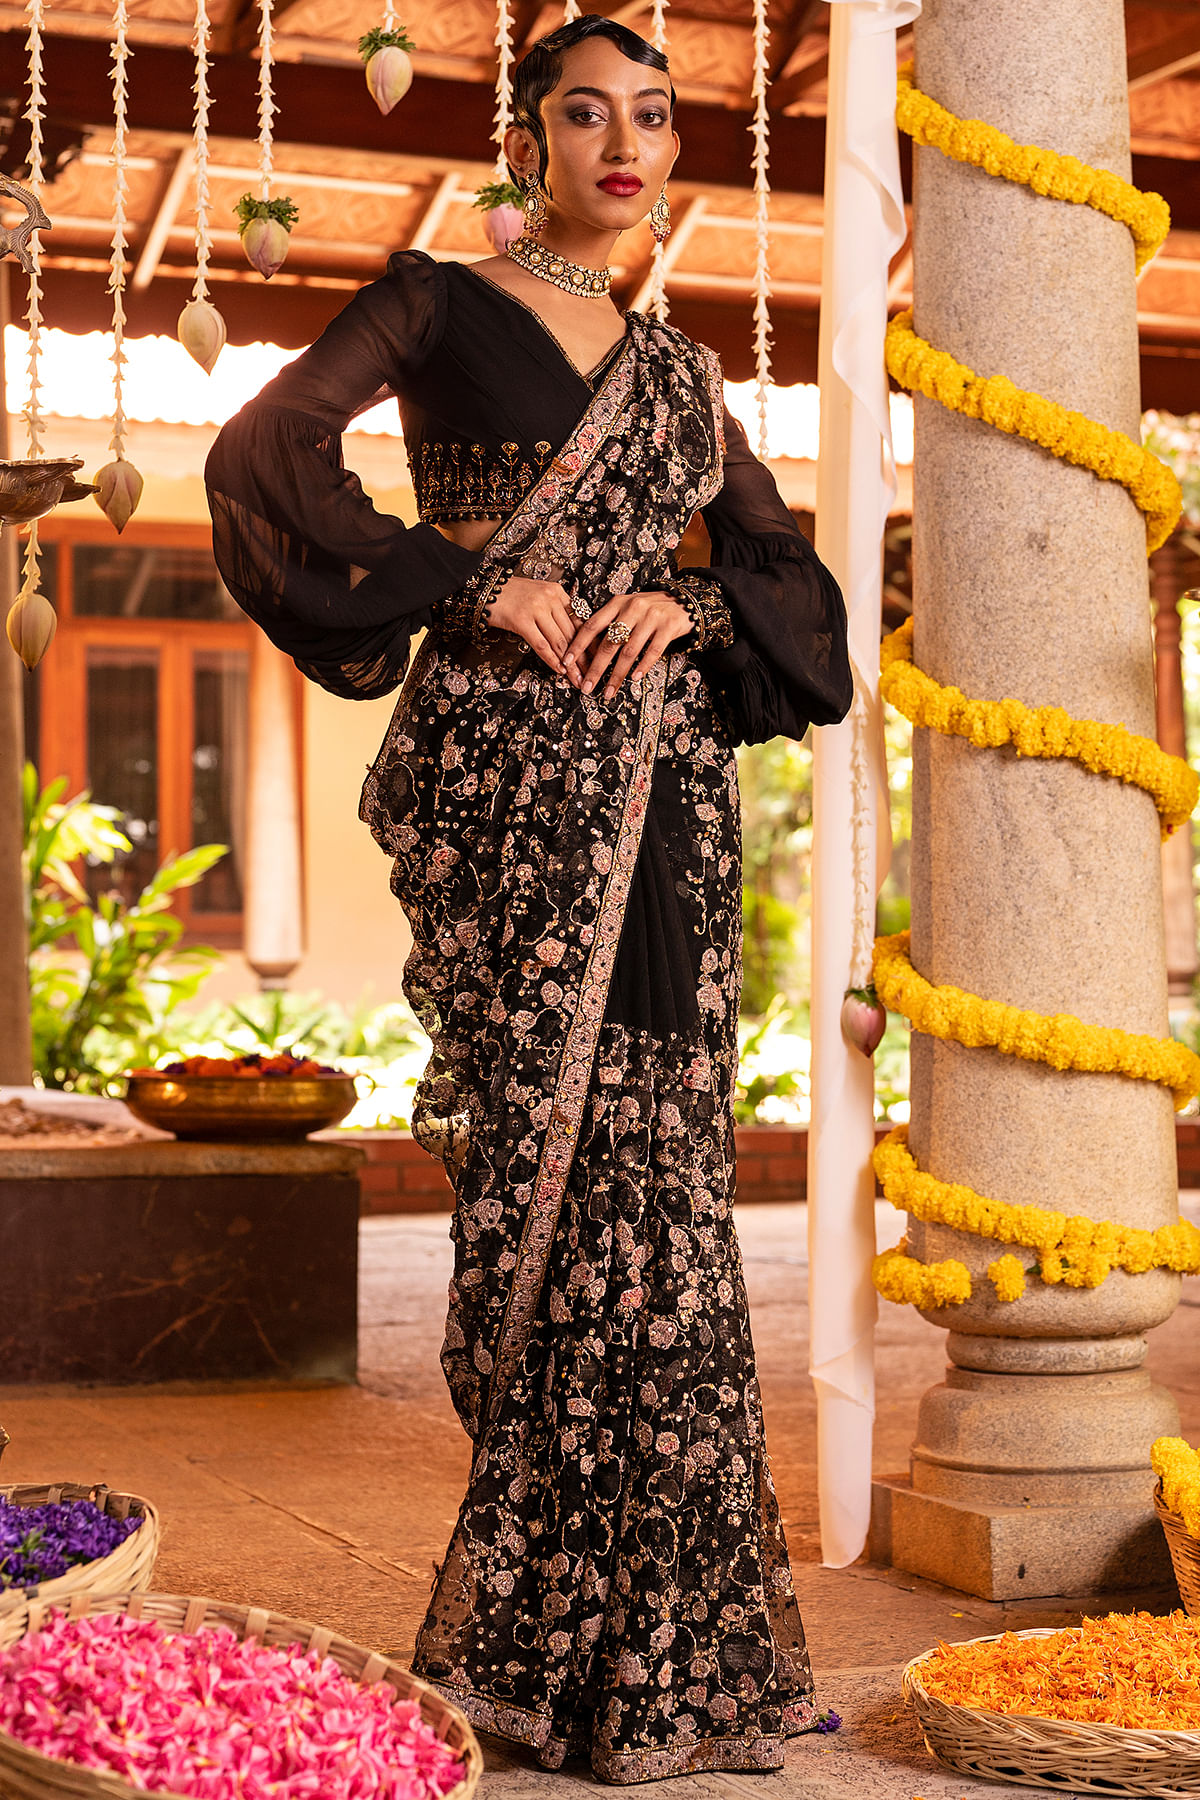 Mannat Collections: Salwar Kameez, Churidar, Lehenga Choli, Saree & Gown -  t.ly/8pD9 Facebook page: https://business.facebook.com/mannatco/ Salwar  Kameez, Lehenga Choli, Sari and Gown Call or Whatsapp +918447723420, This  Link opens whatsapp directly ...